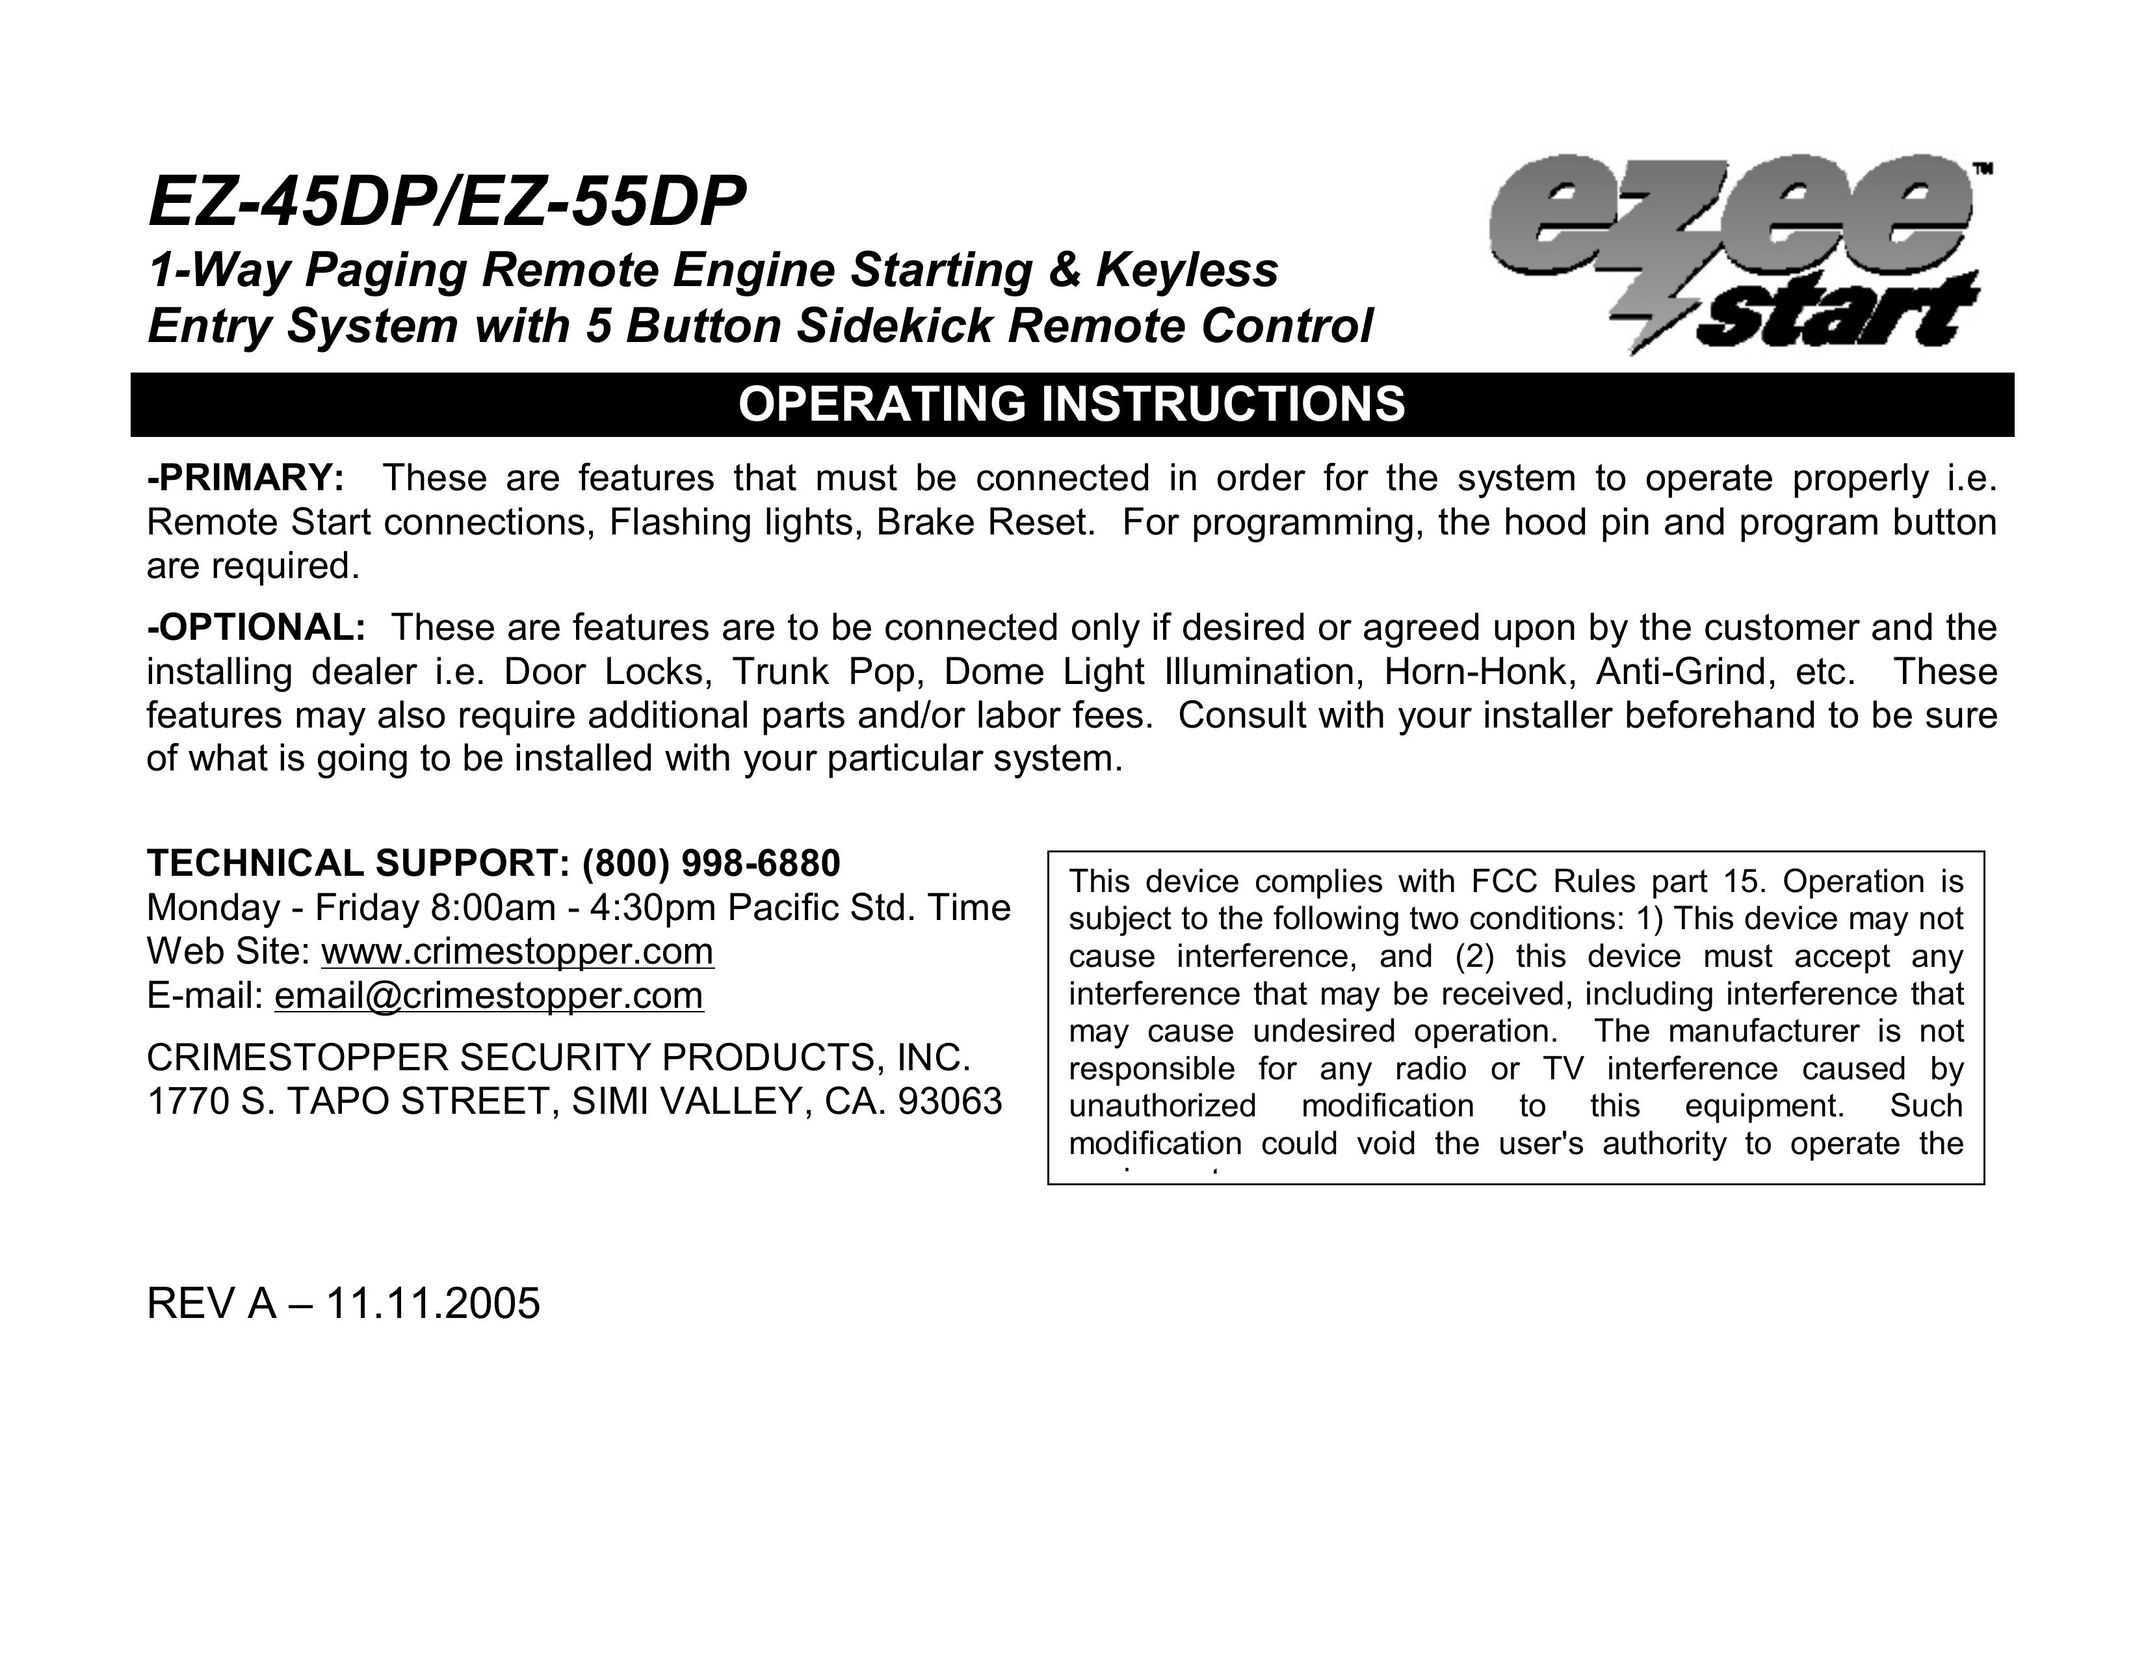 Crimestopper Security Products EZ-55DP Pager User Manual